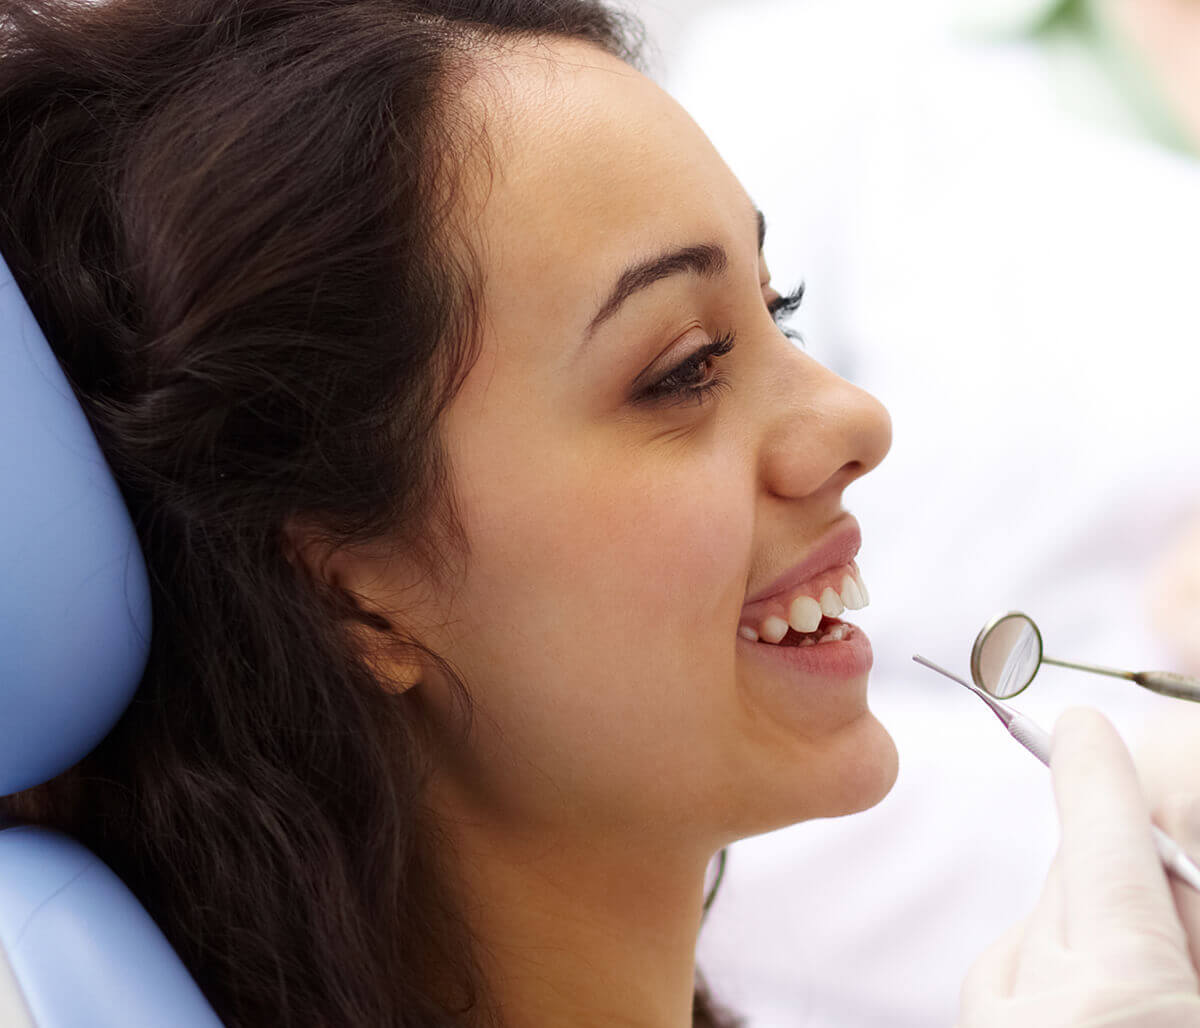 How Durable is the Dental Crowns Procedure in Bloomington IL Area